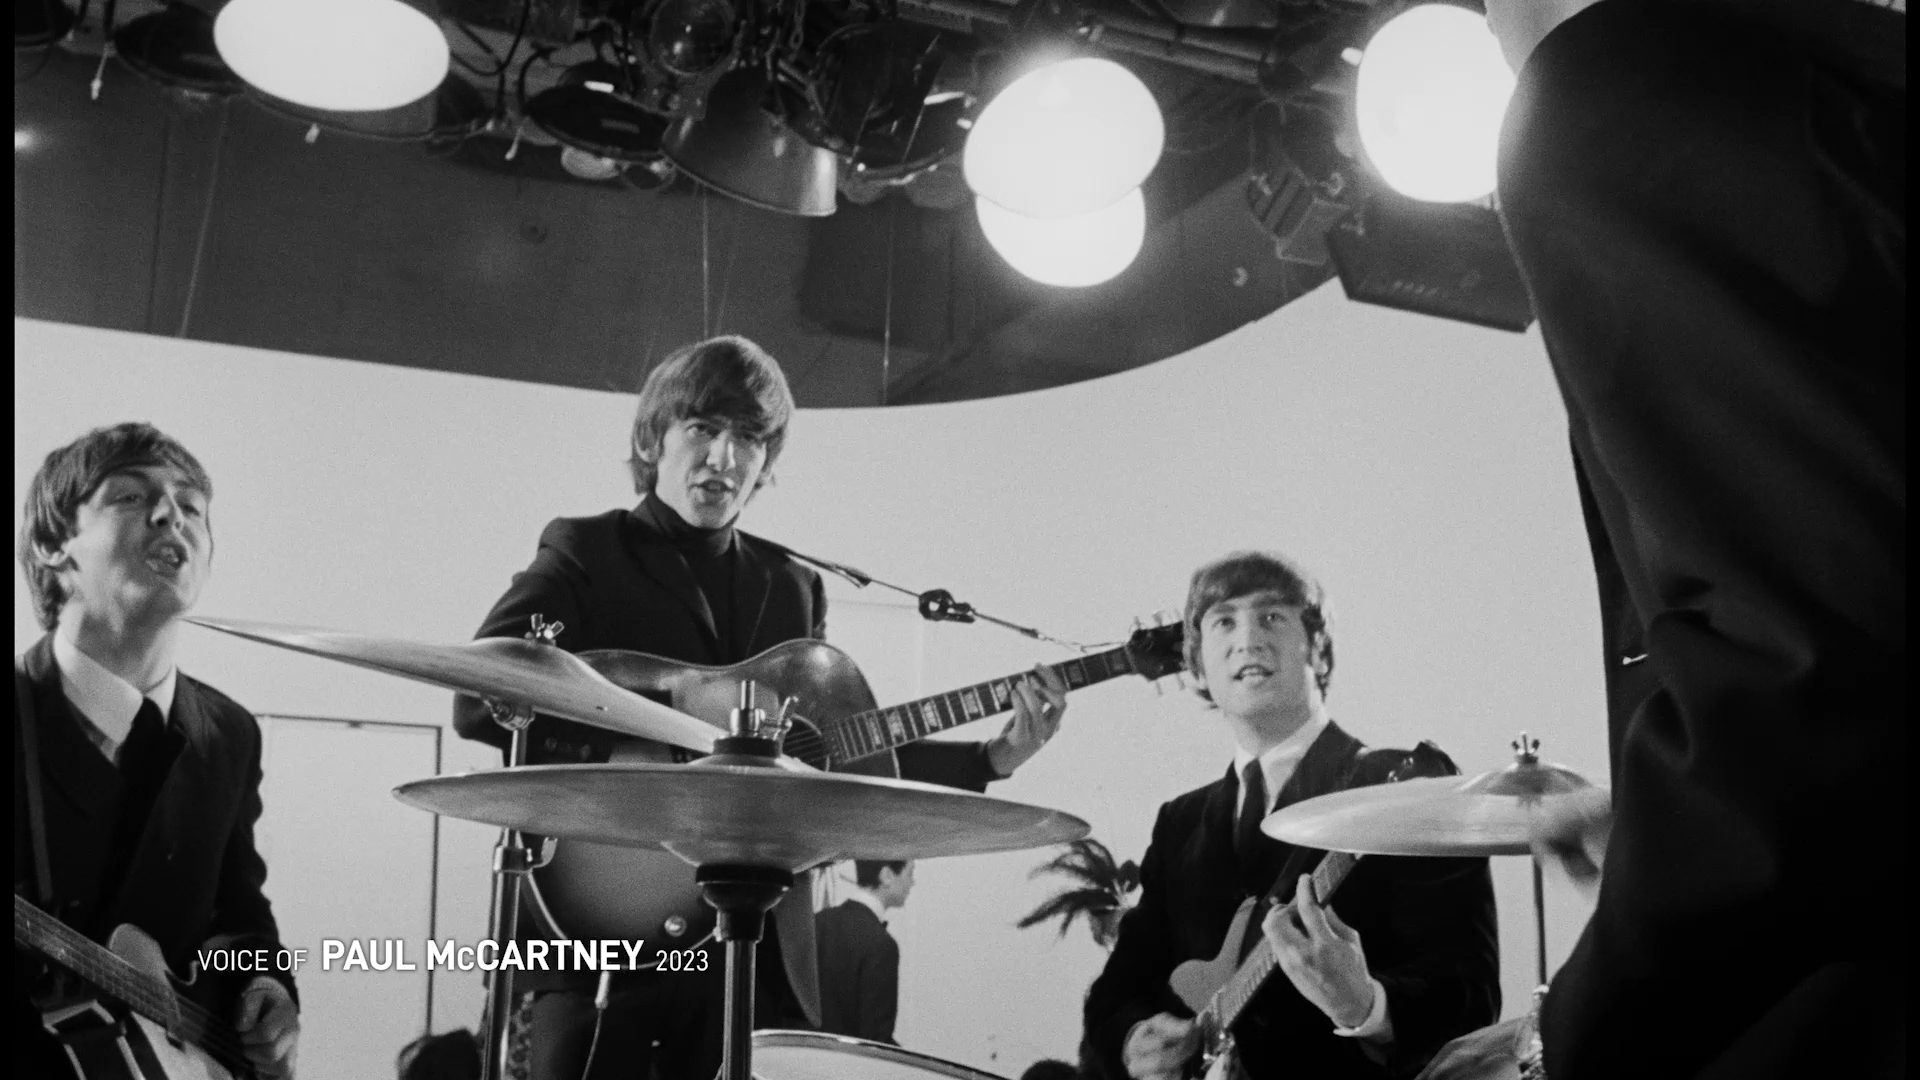 Trailer for “Now And Then – The Last Beatles Song” documentary film.